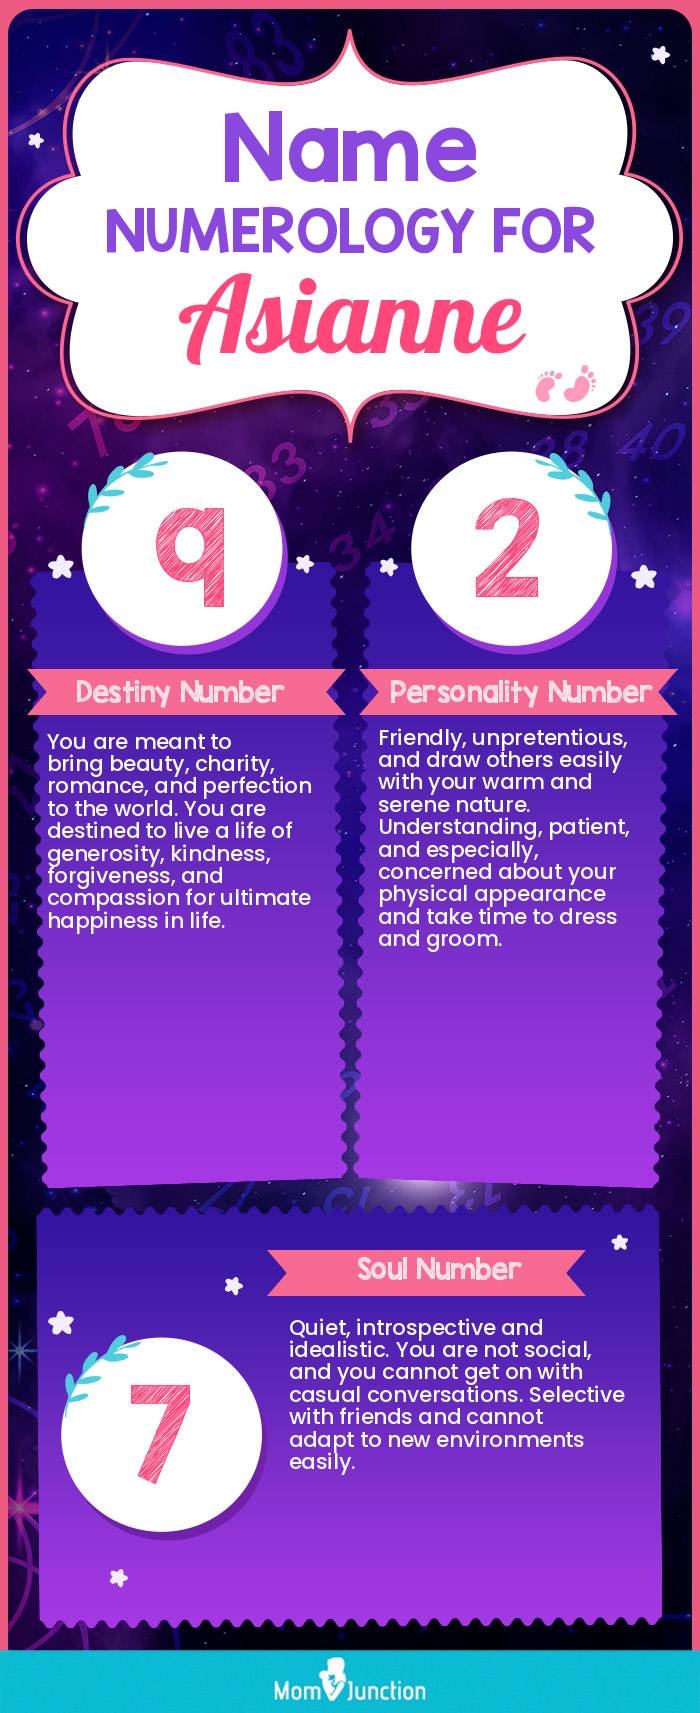 name-numerology-for-asianne-girl